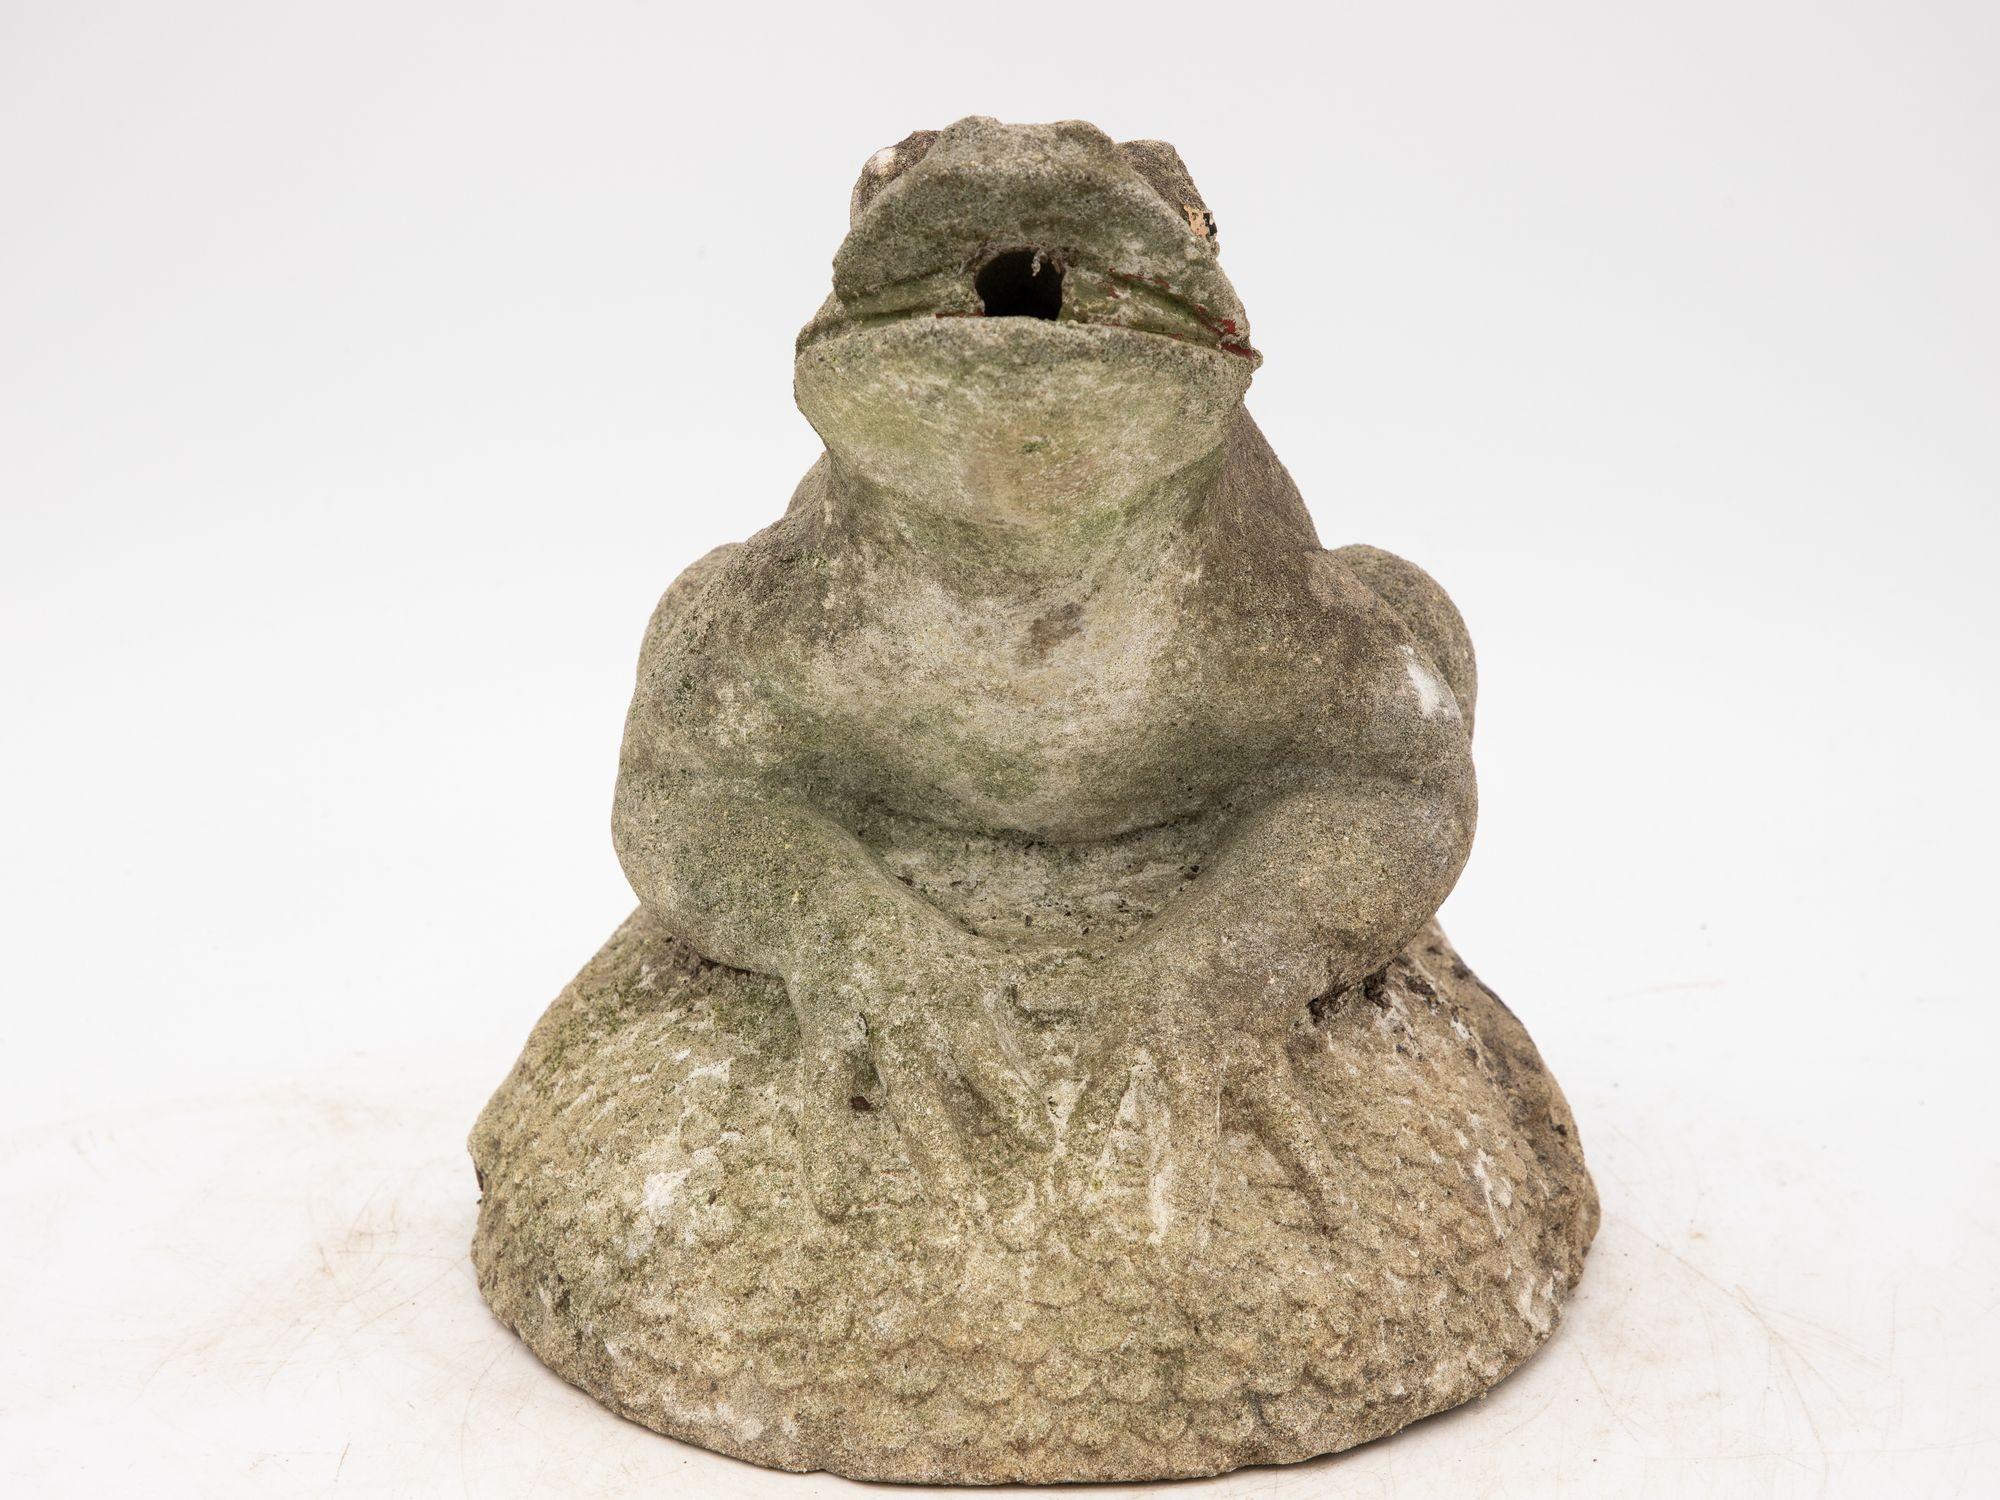 The small concrete frog fountain is a delightful addition to any outdoor space, exuding whimsy and tranquility. With its charming design, it features a playful frog perched atop a pond rock. The rock displays an unusual fish scale pattern. This